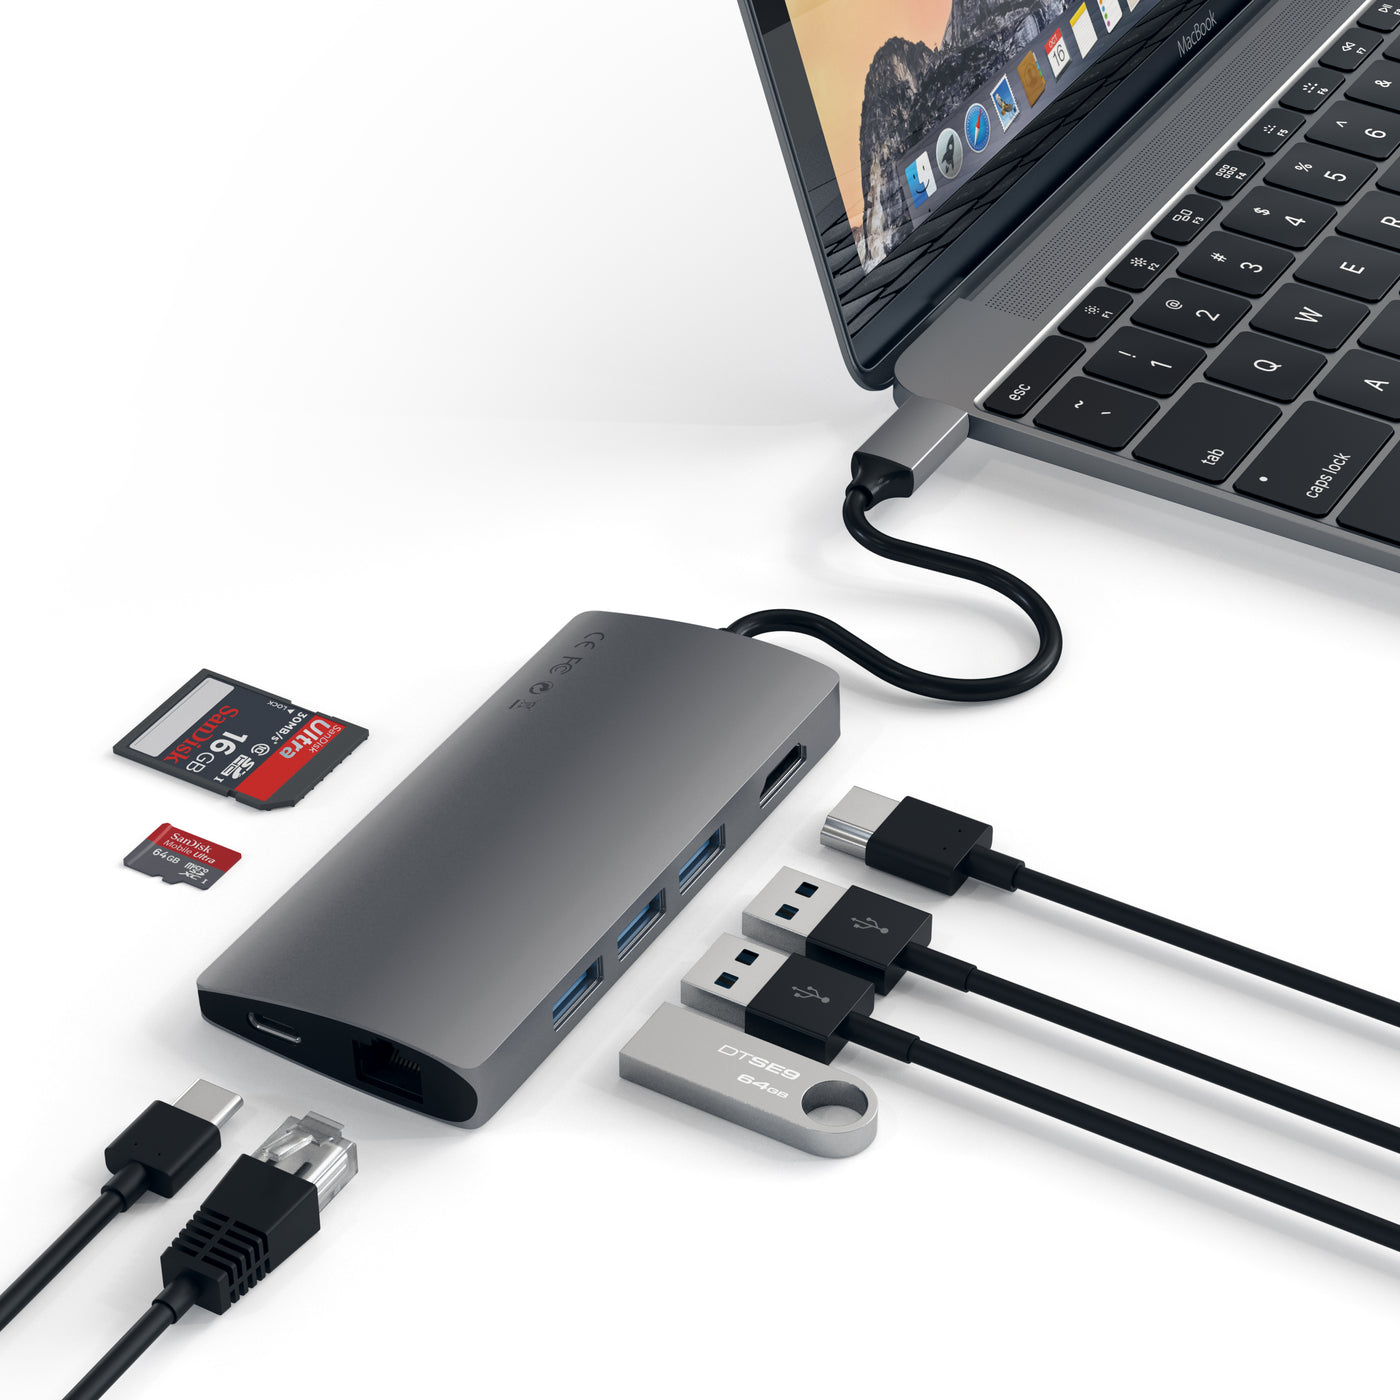 The Satechi Type-C Multi Port Adapter in Space Grey connected to a MacBook with 5 wires, 2 SD cards and 1 USB next to the ports of the adapter